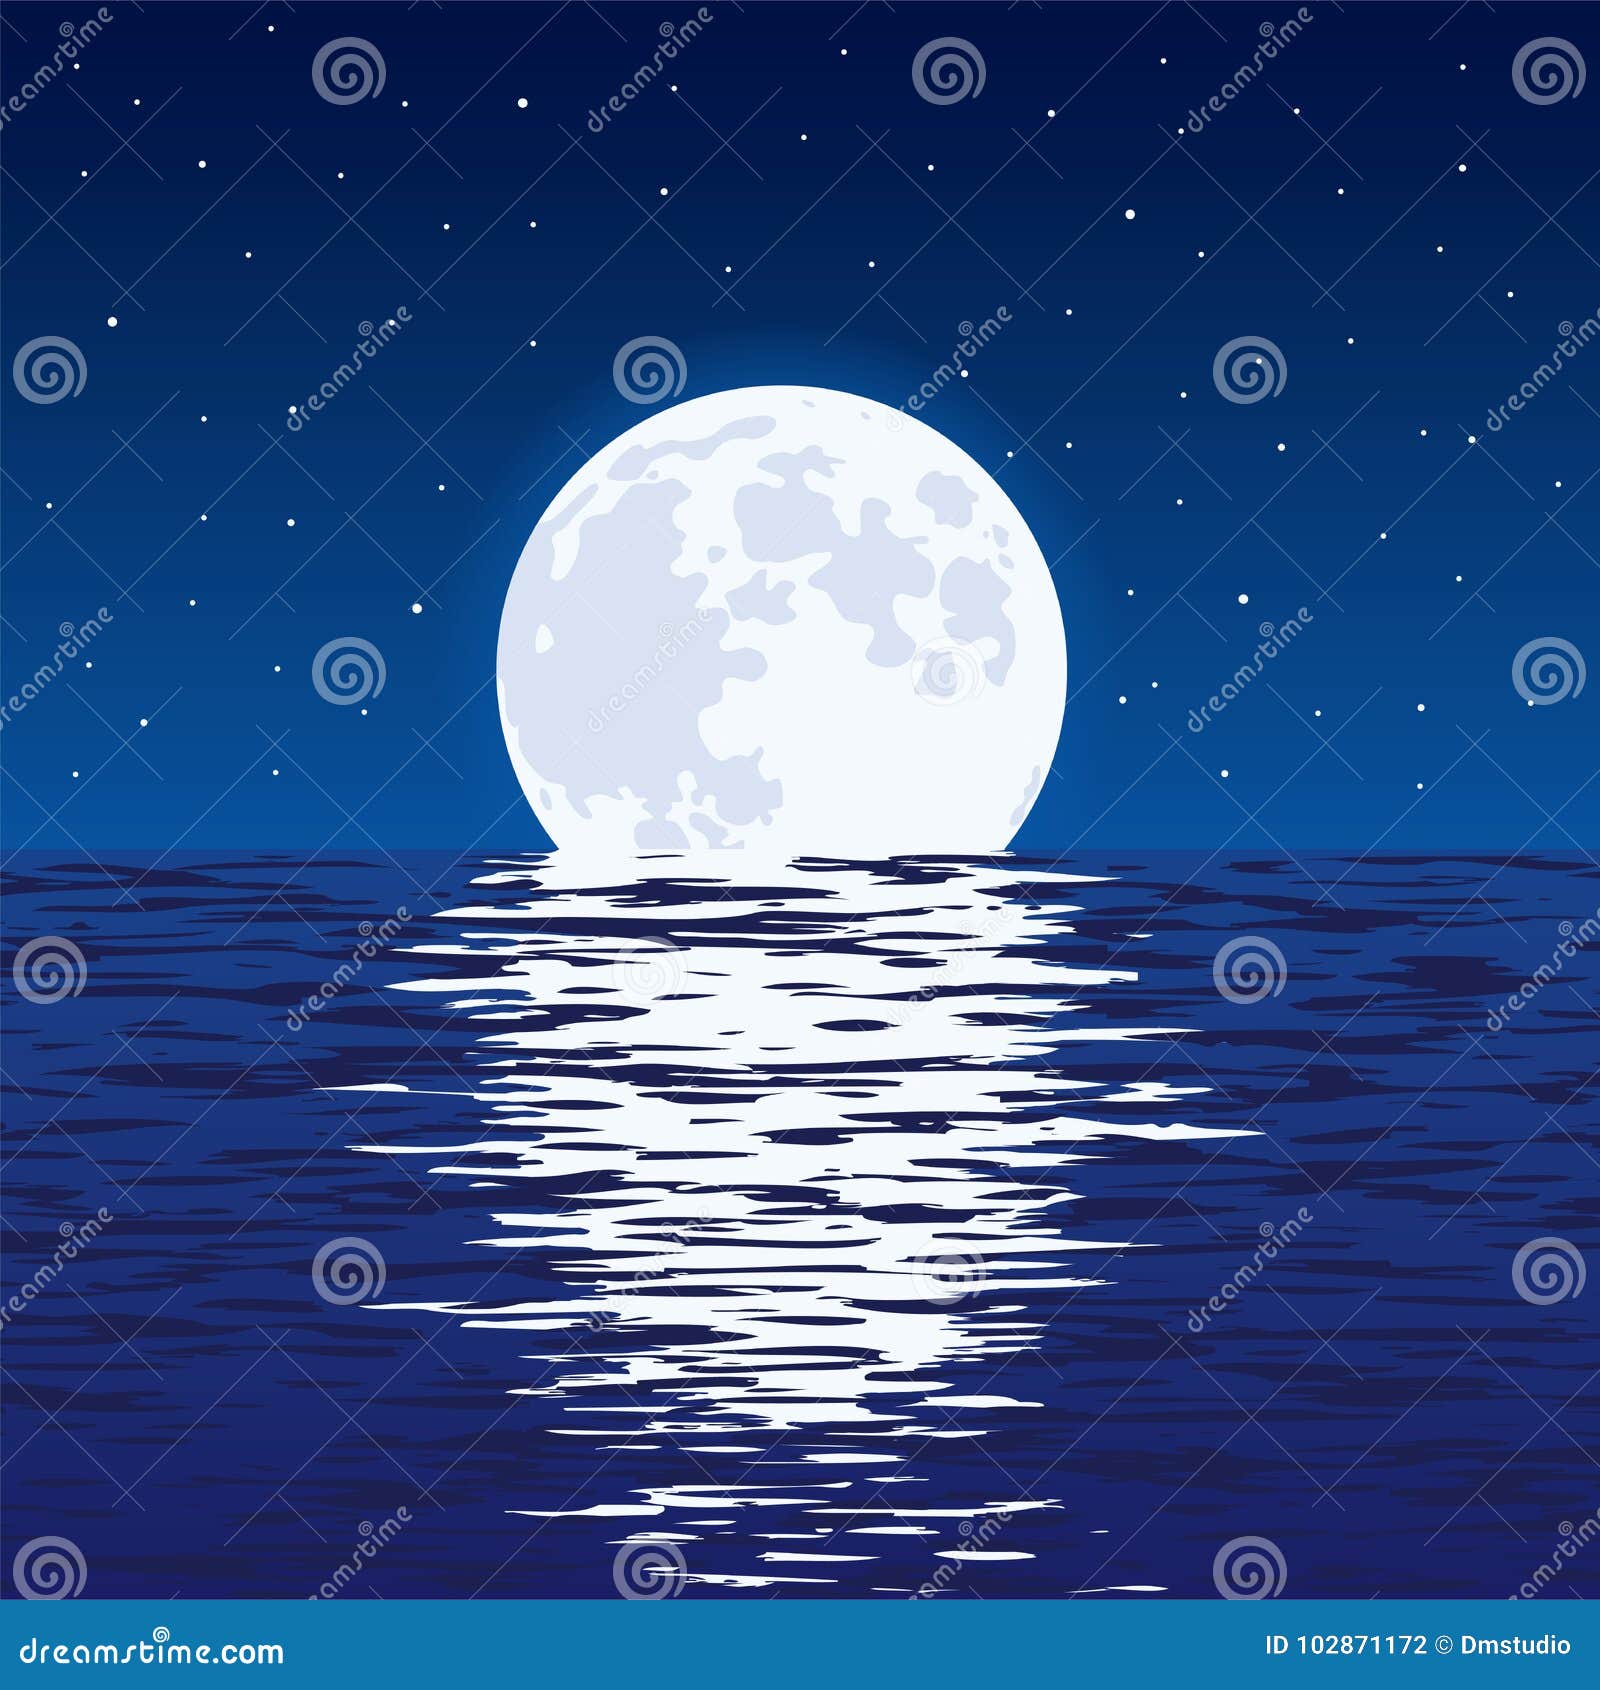 background of blue sea and full moon at night. 